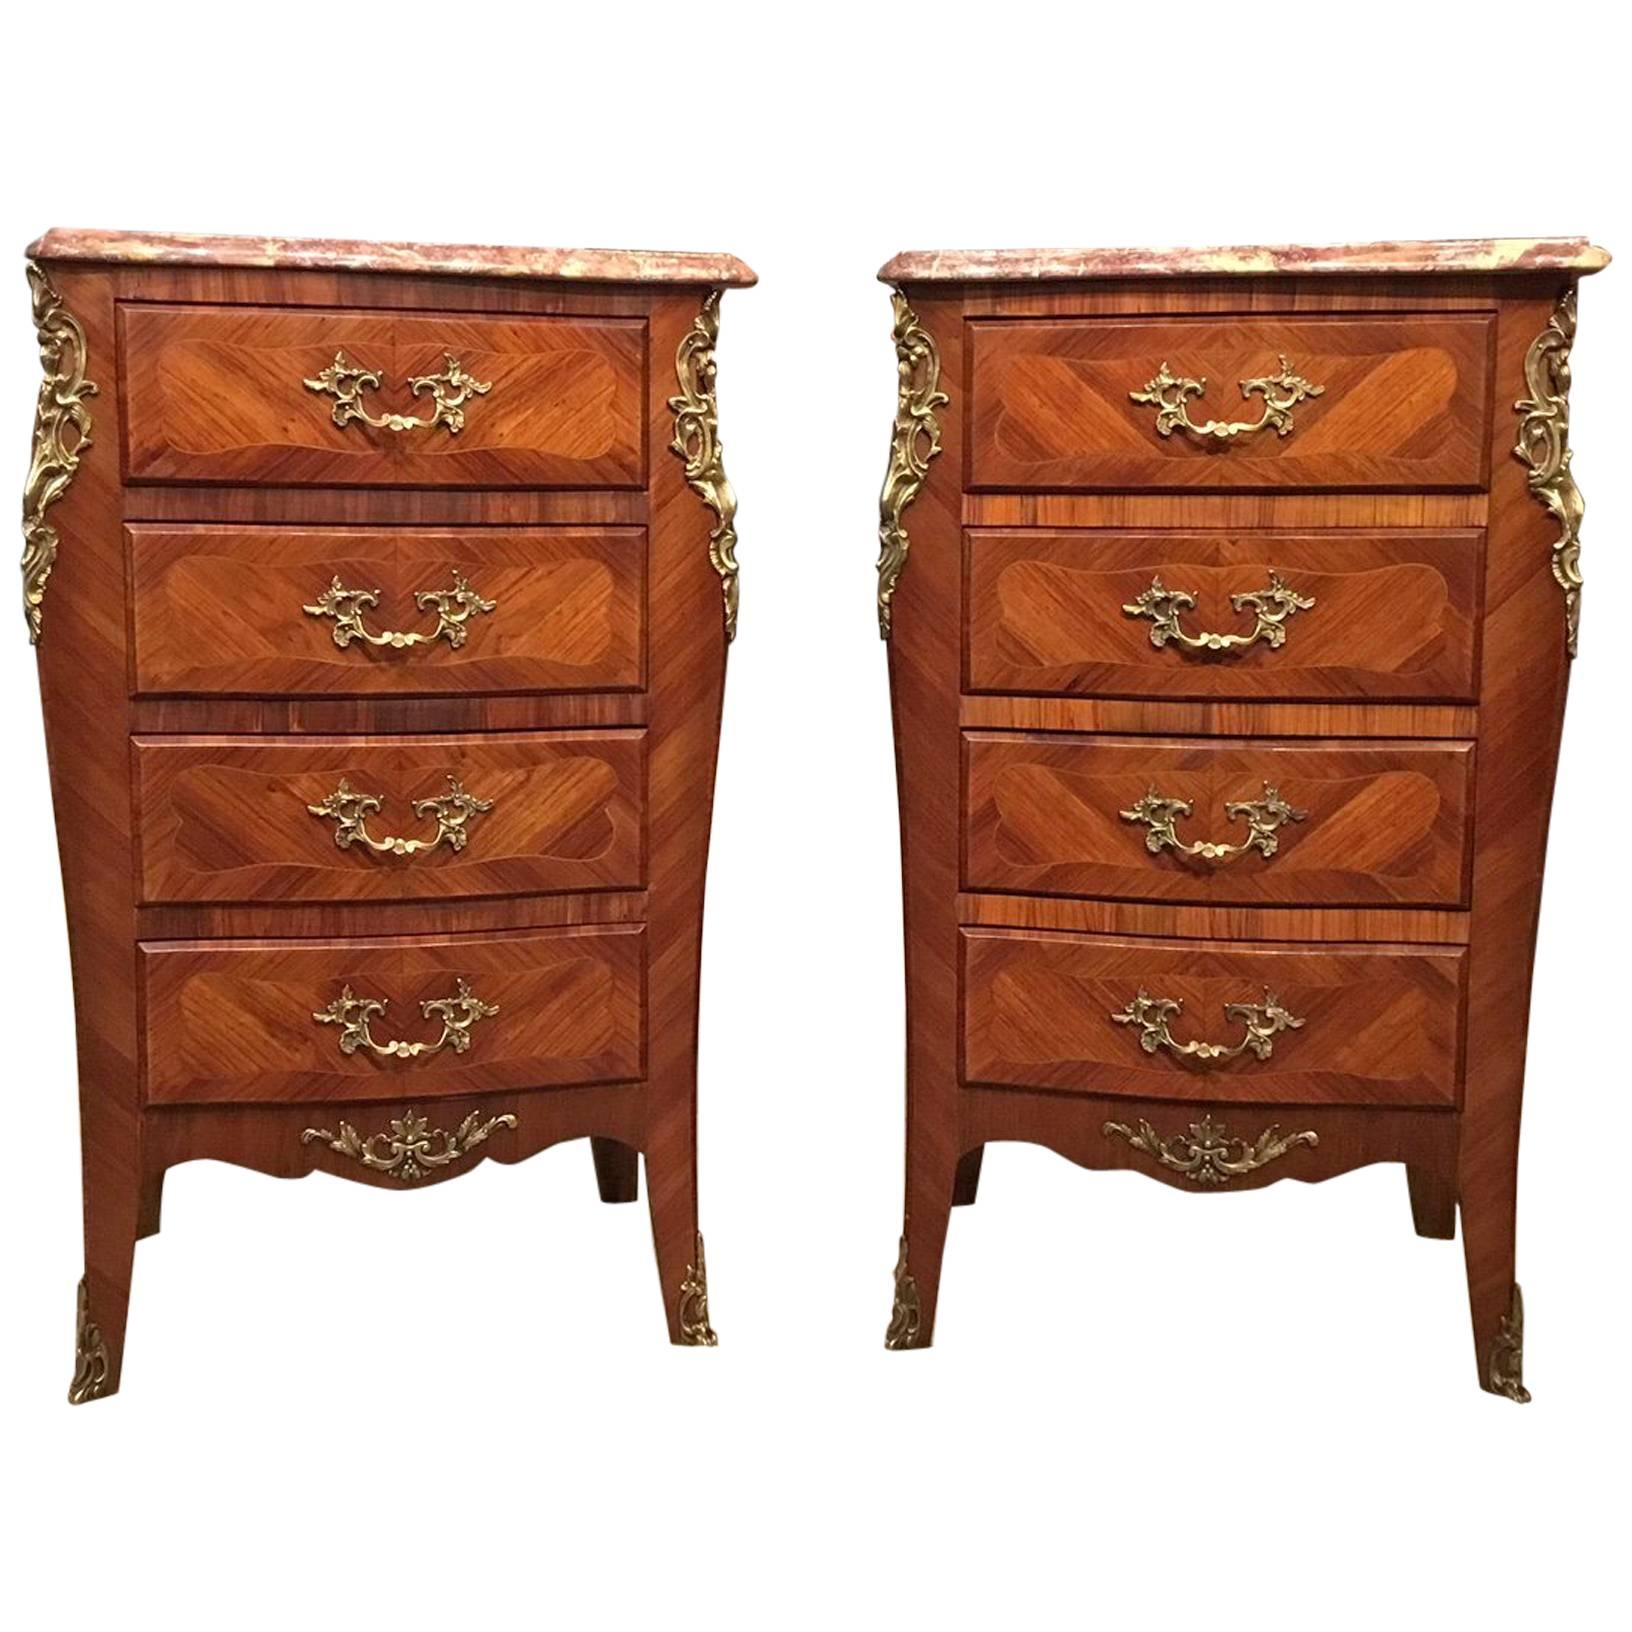 Fine Pair of Late 19th Century French Kingwood Bedside Chests